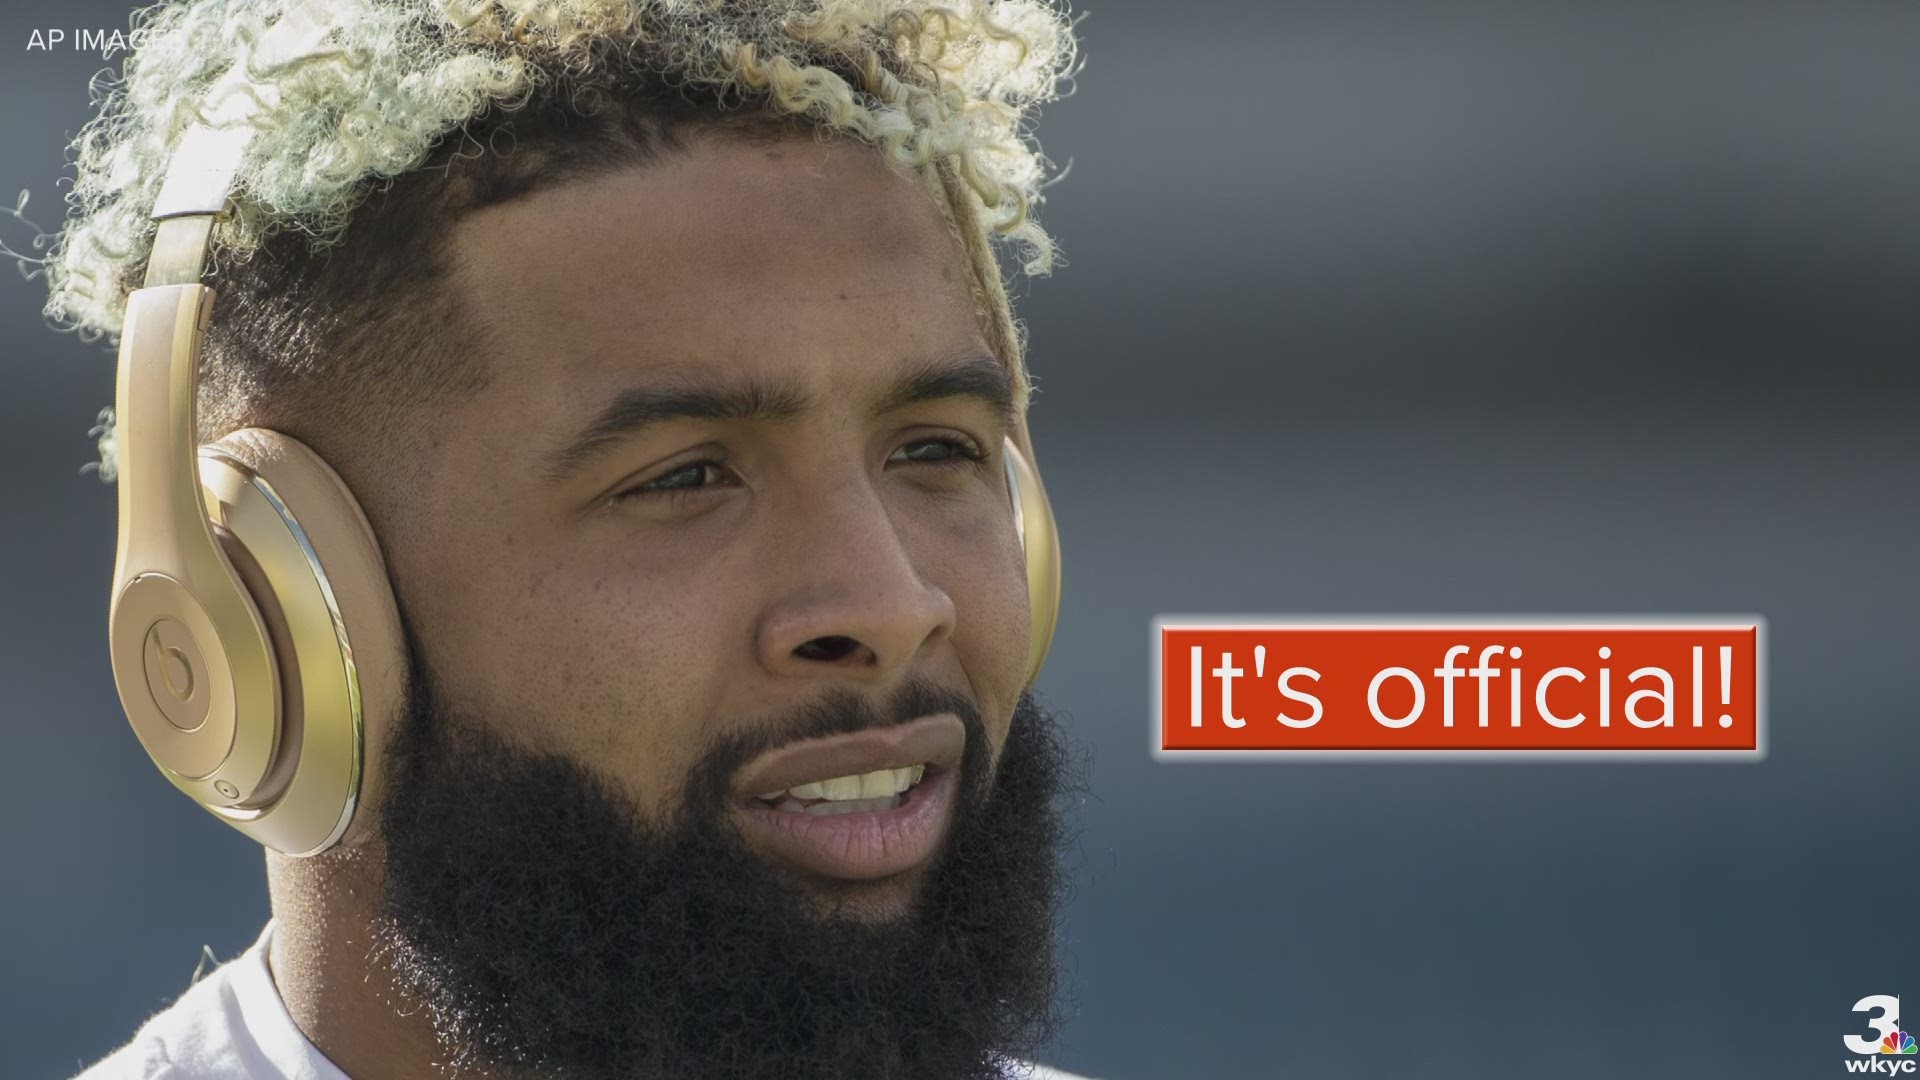 On Wednesday, the Cleveland Browns officially announced that they have acquired wide receiver Odell Beckham Jr. in a trade with the New York Giants.